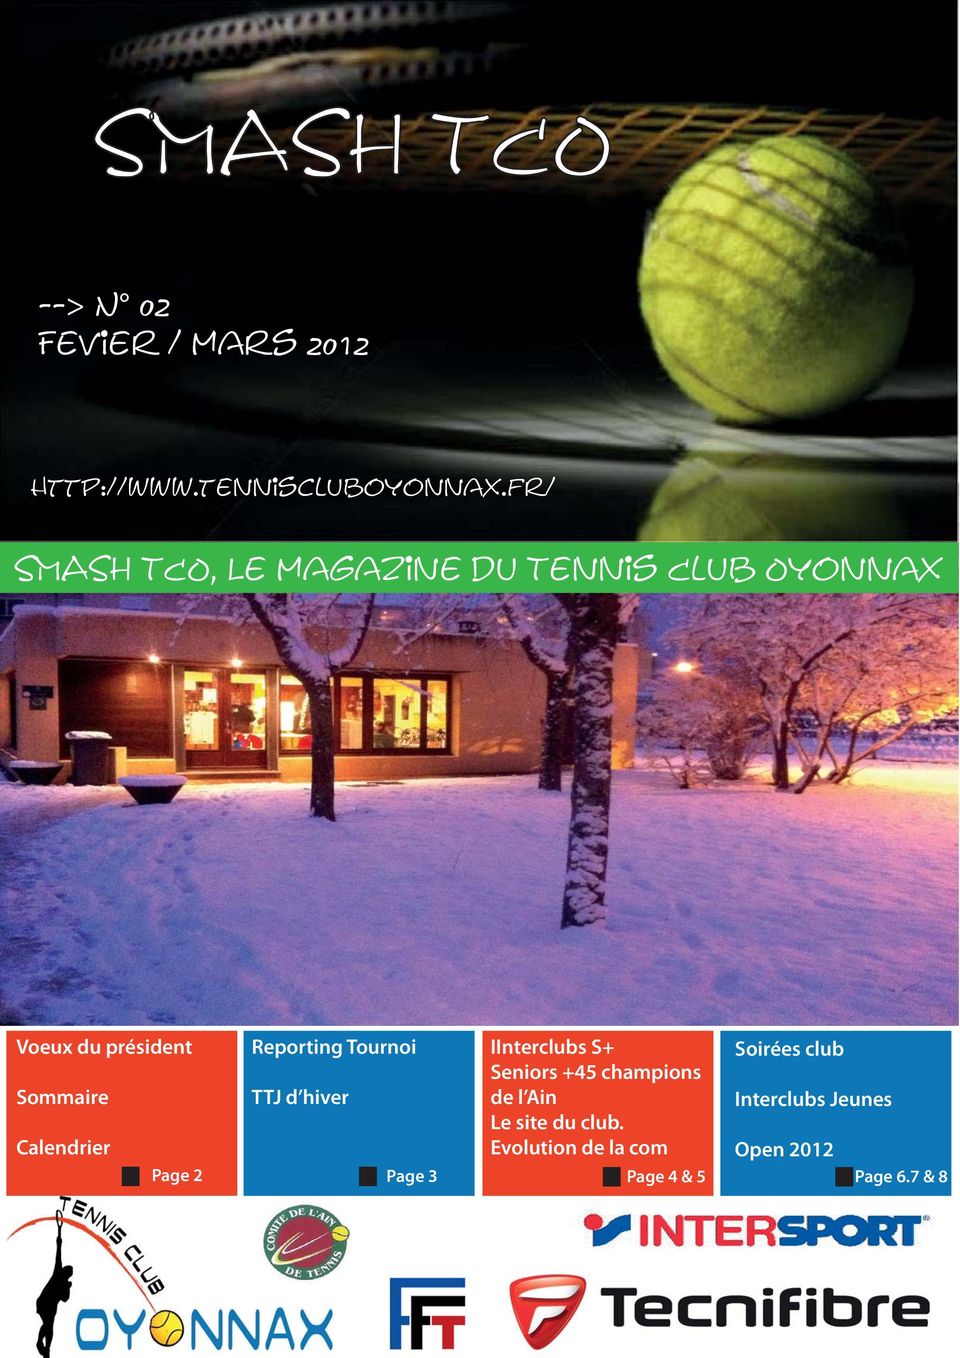 Calendrier Page 2 Reporting Tournoi TTJ d hiver Page 3 IInterclubs S+ Seniors +45